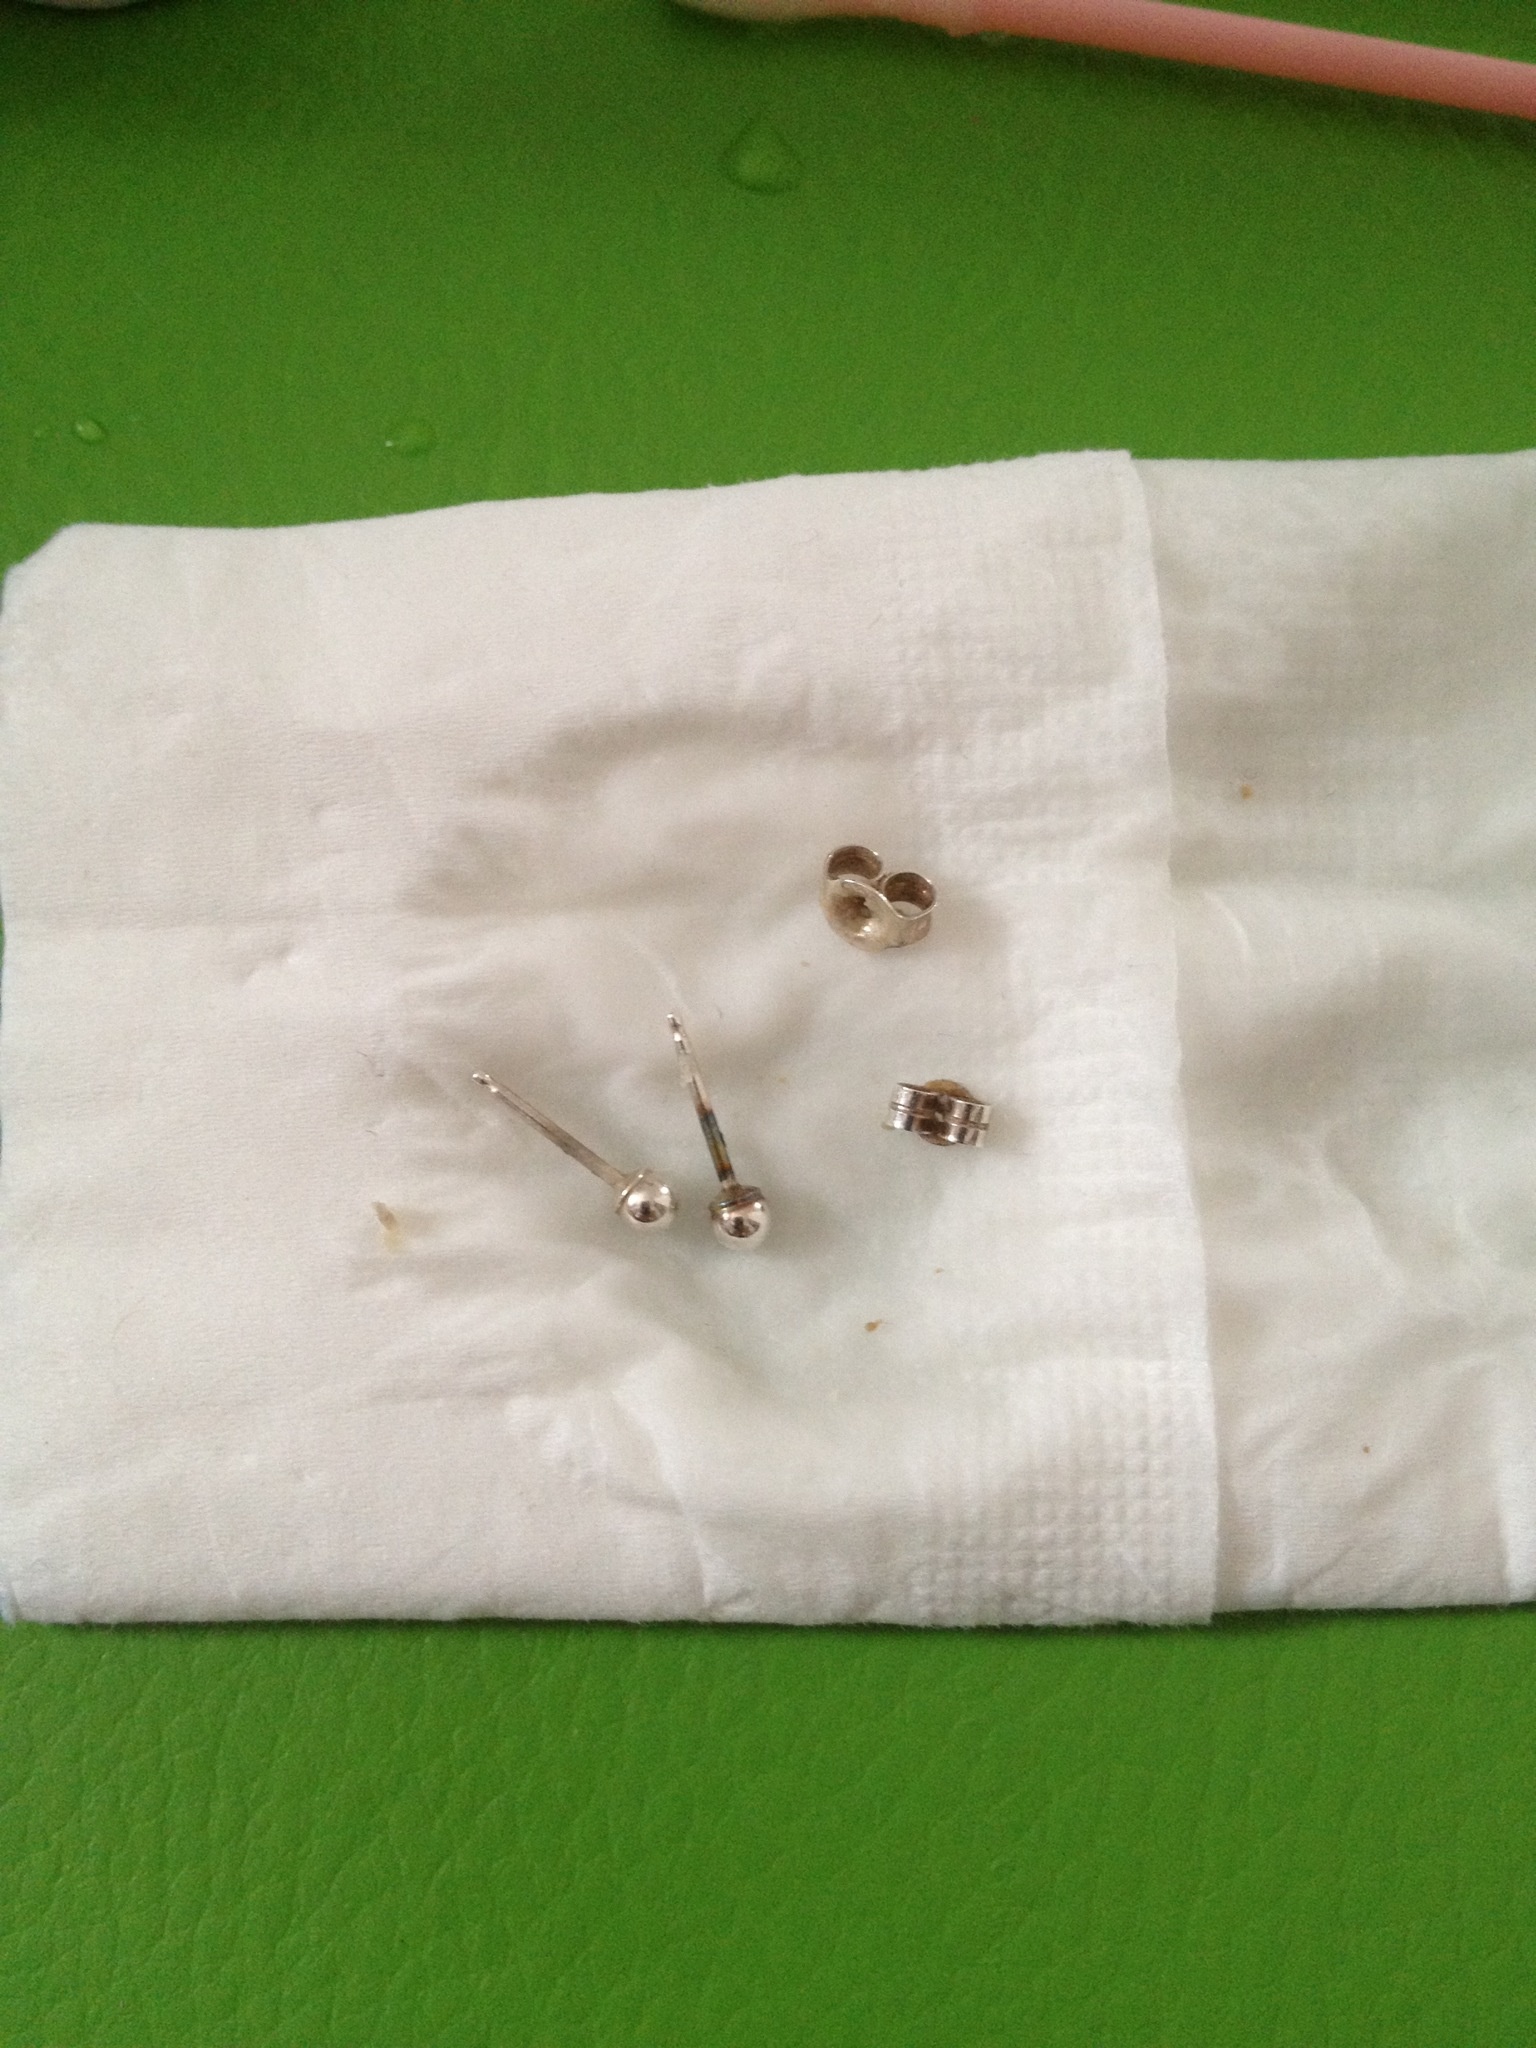 How to Clean Earring Backs?